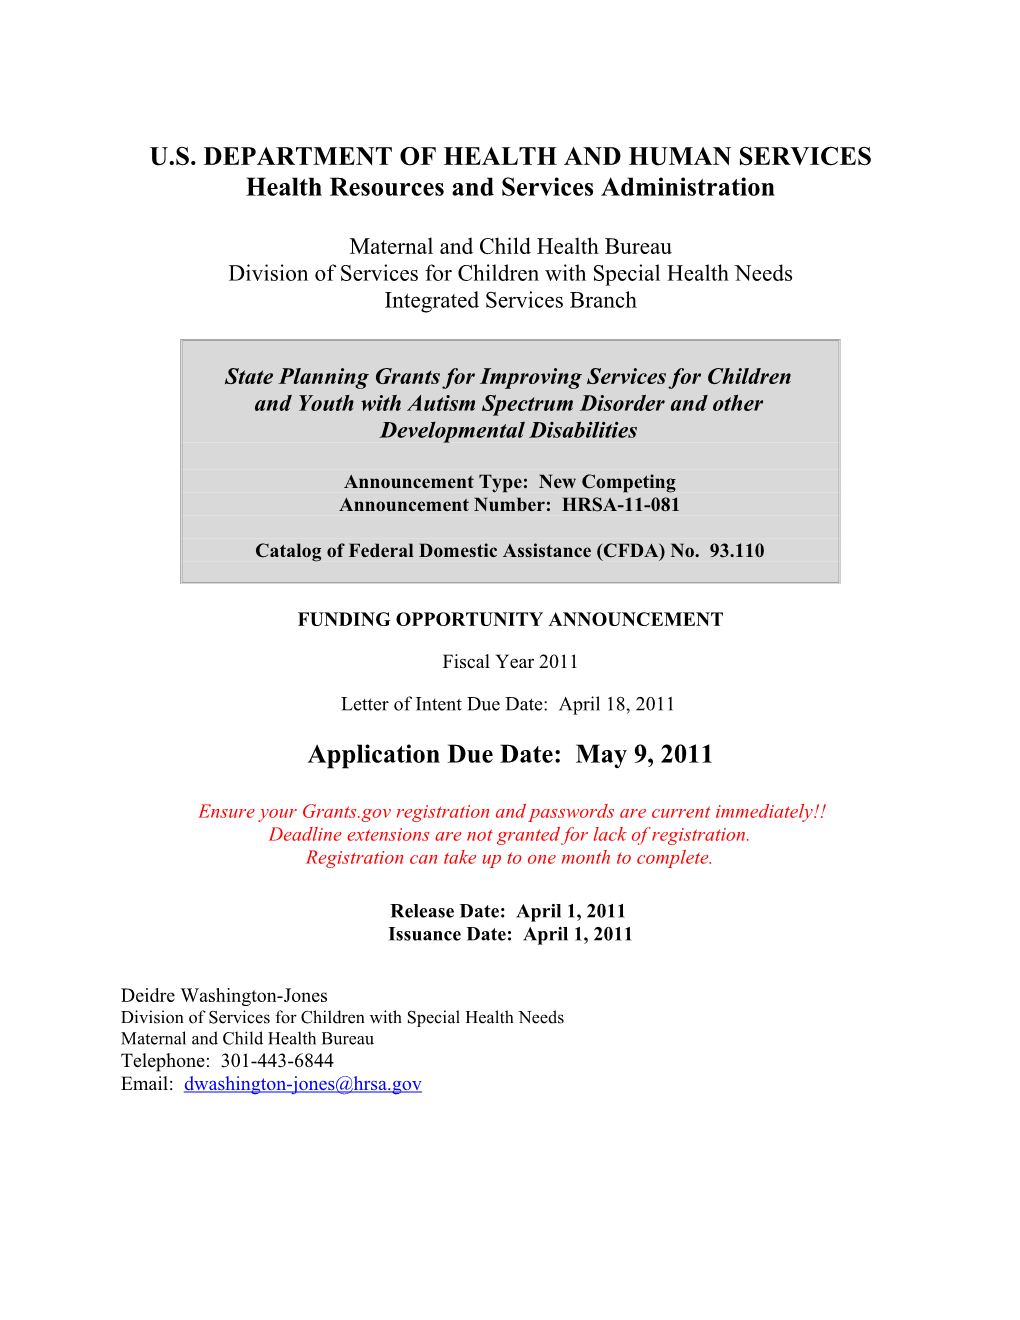 Funding Opportunity Announcement HRSA-11-081